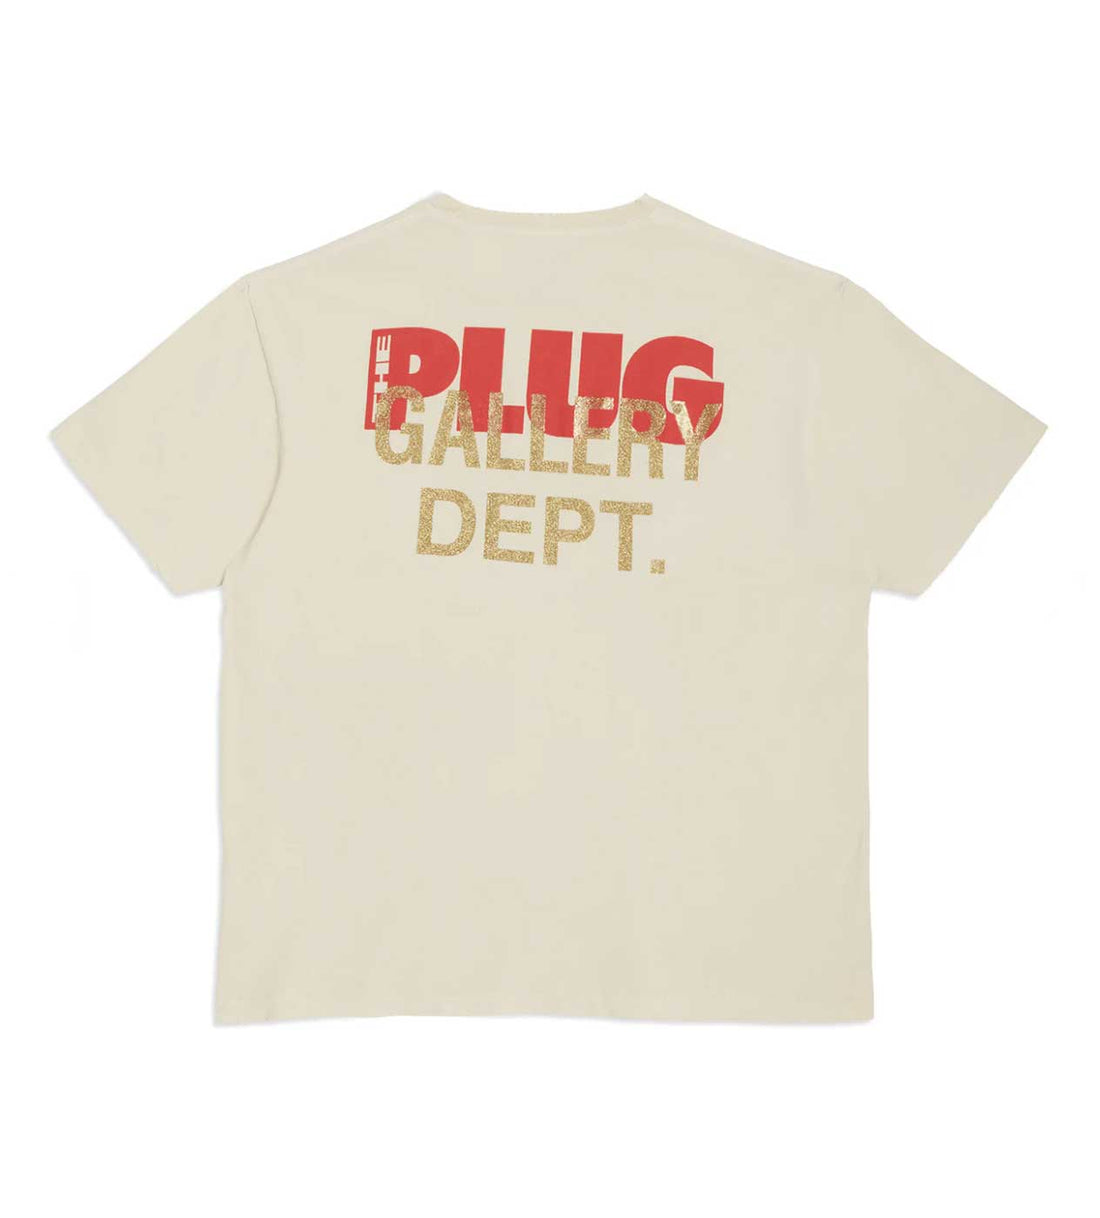 Gallery Dept. Doc Johnny Toymaker Cream Tee back view